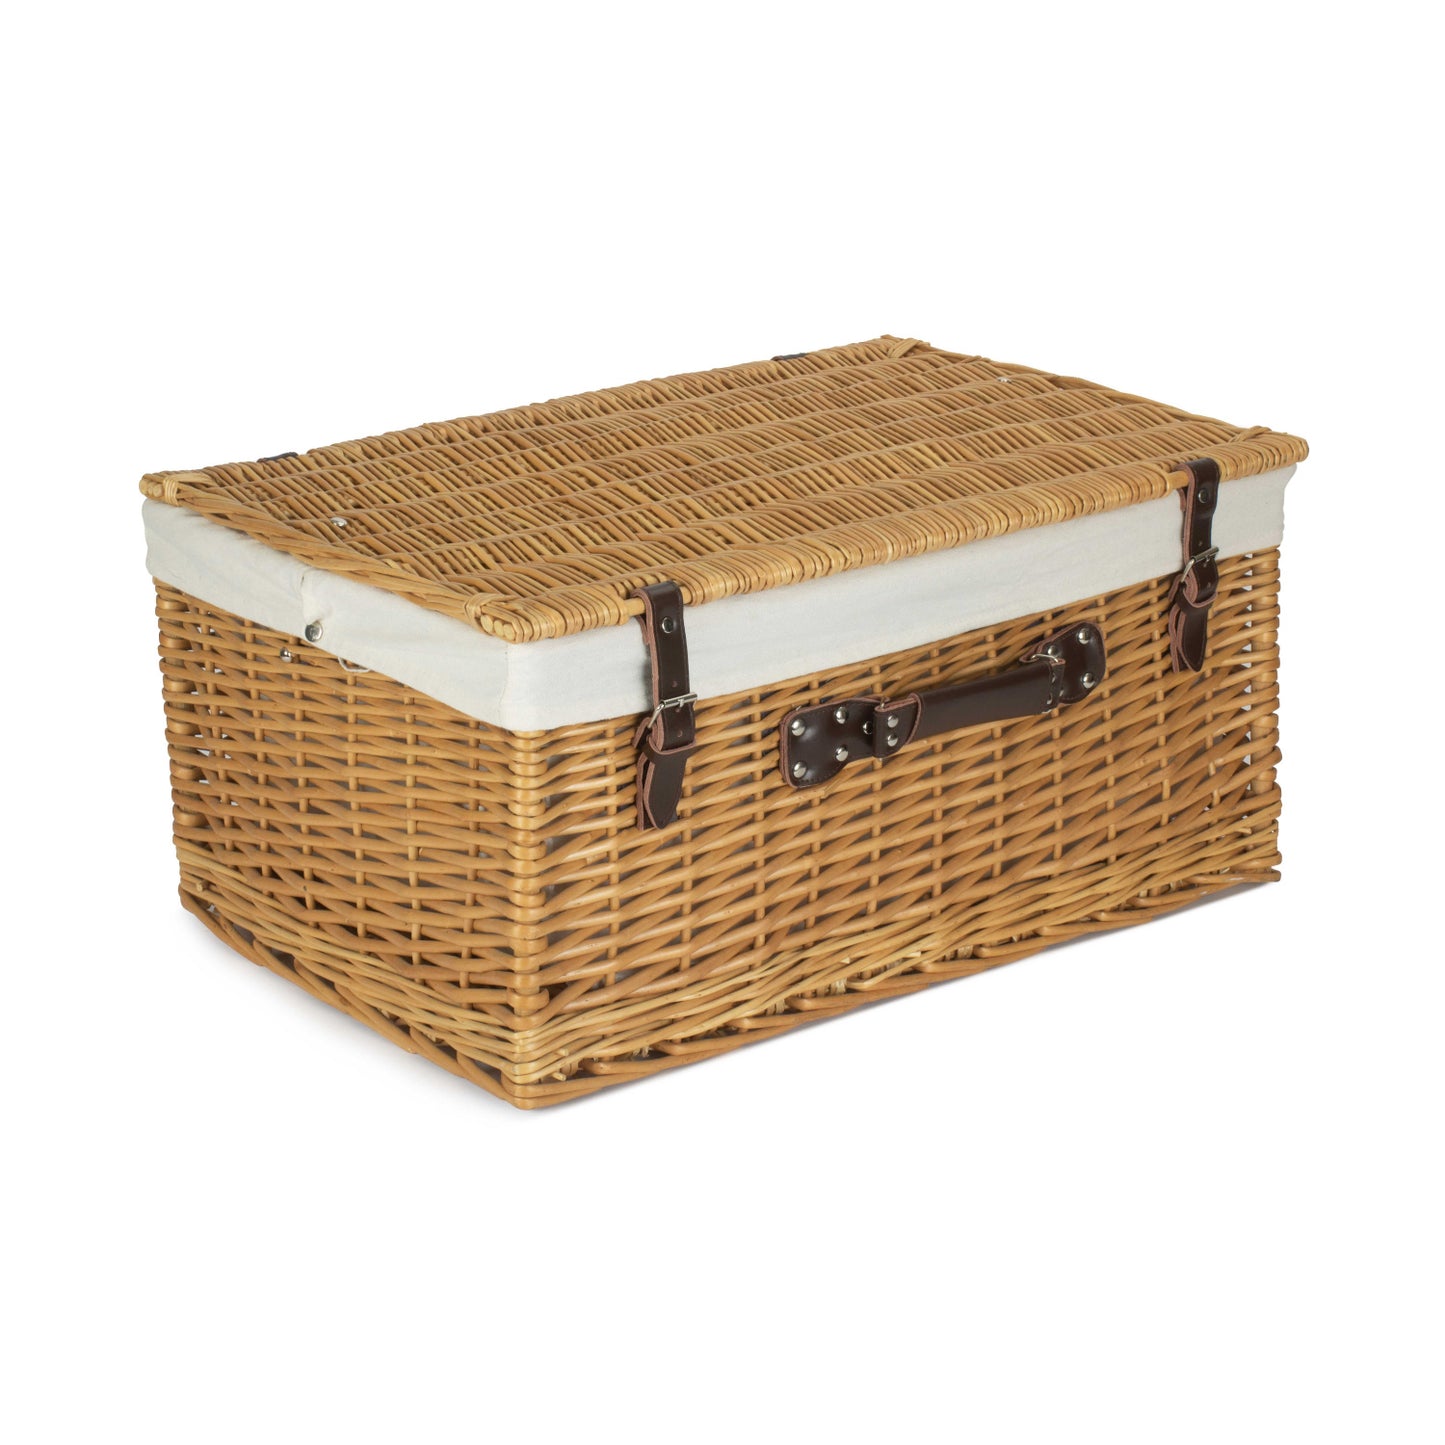 24 Inch Buff Hamper With White Lining